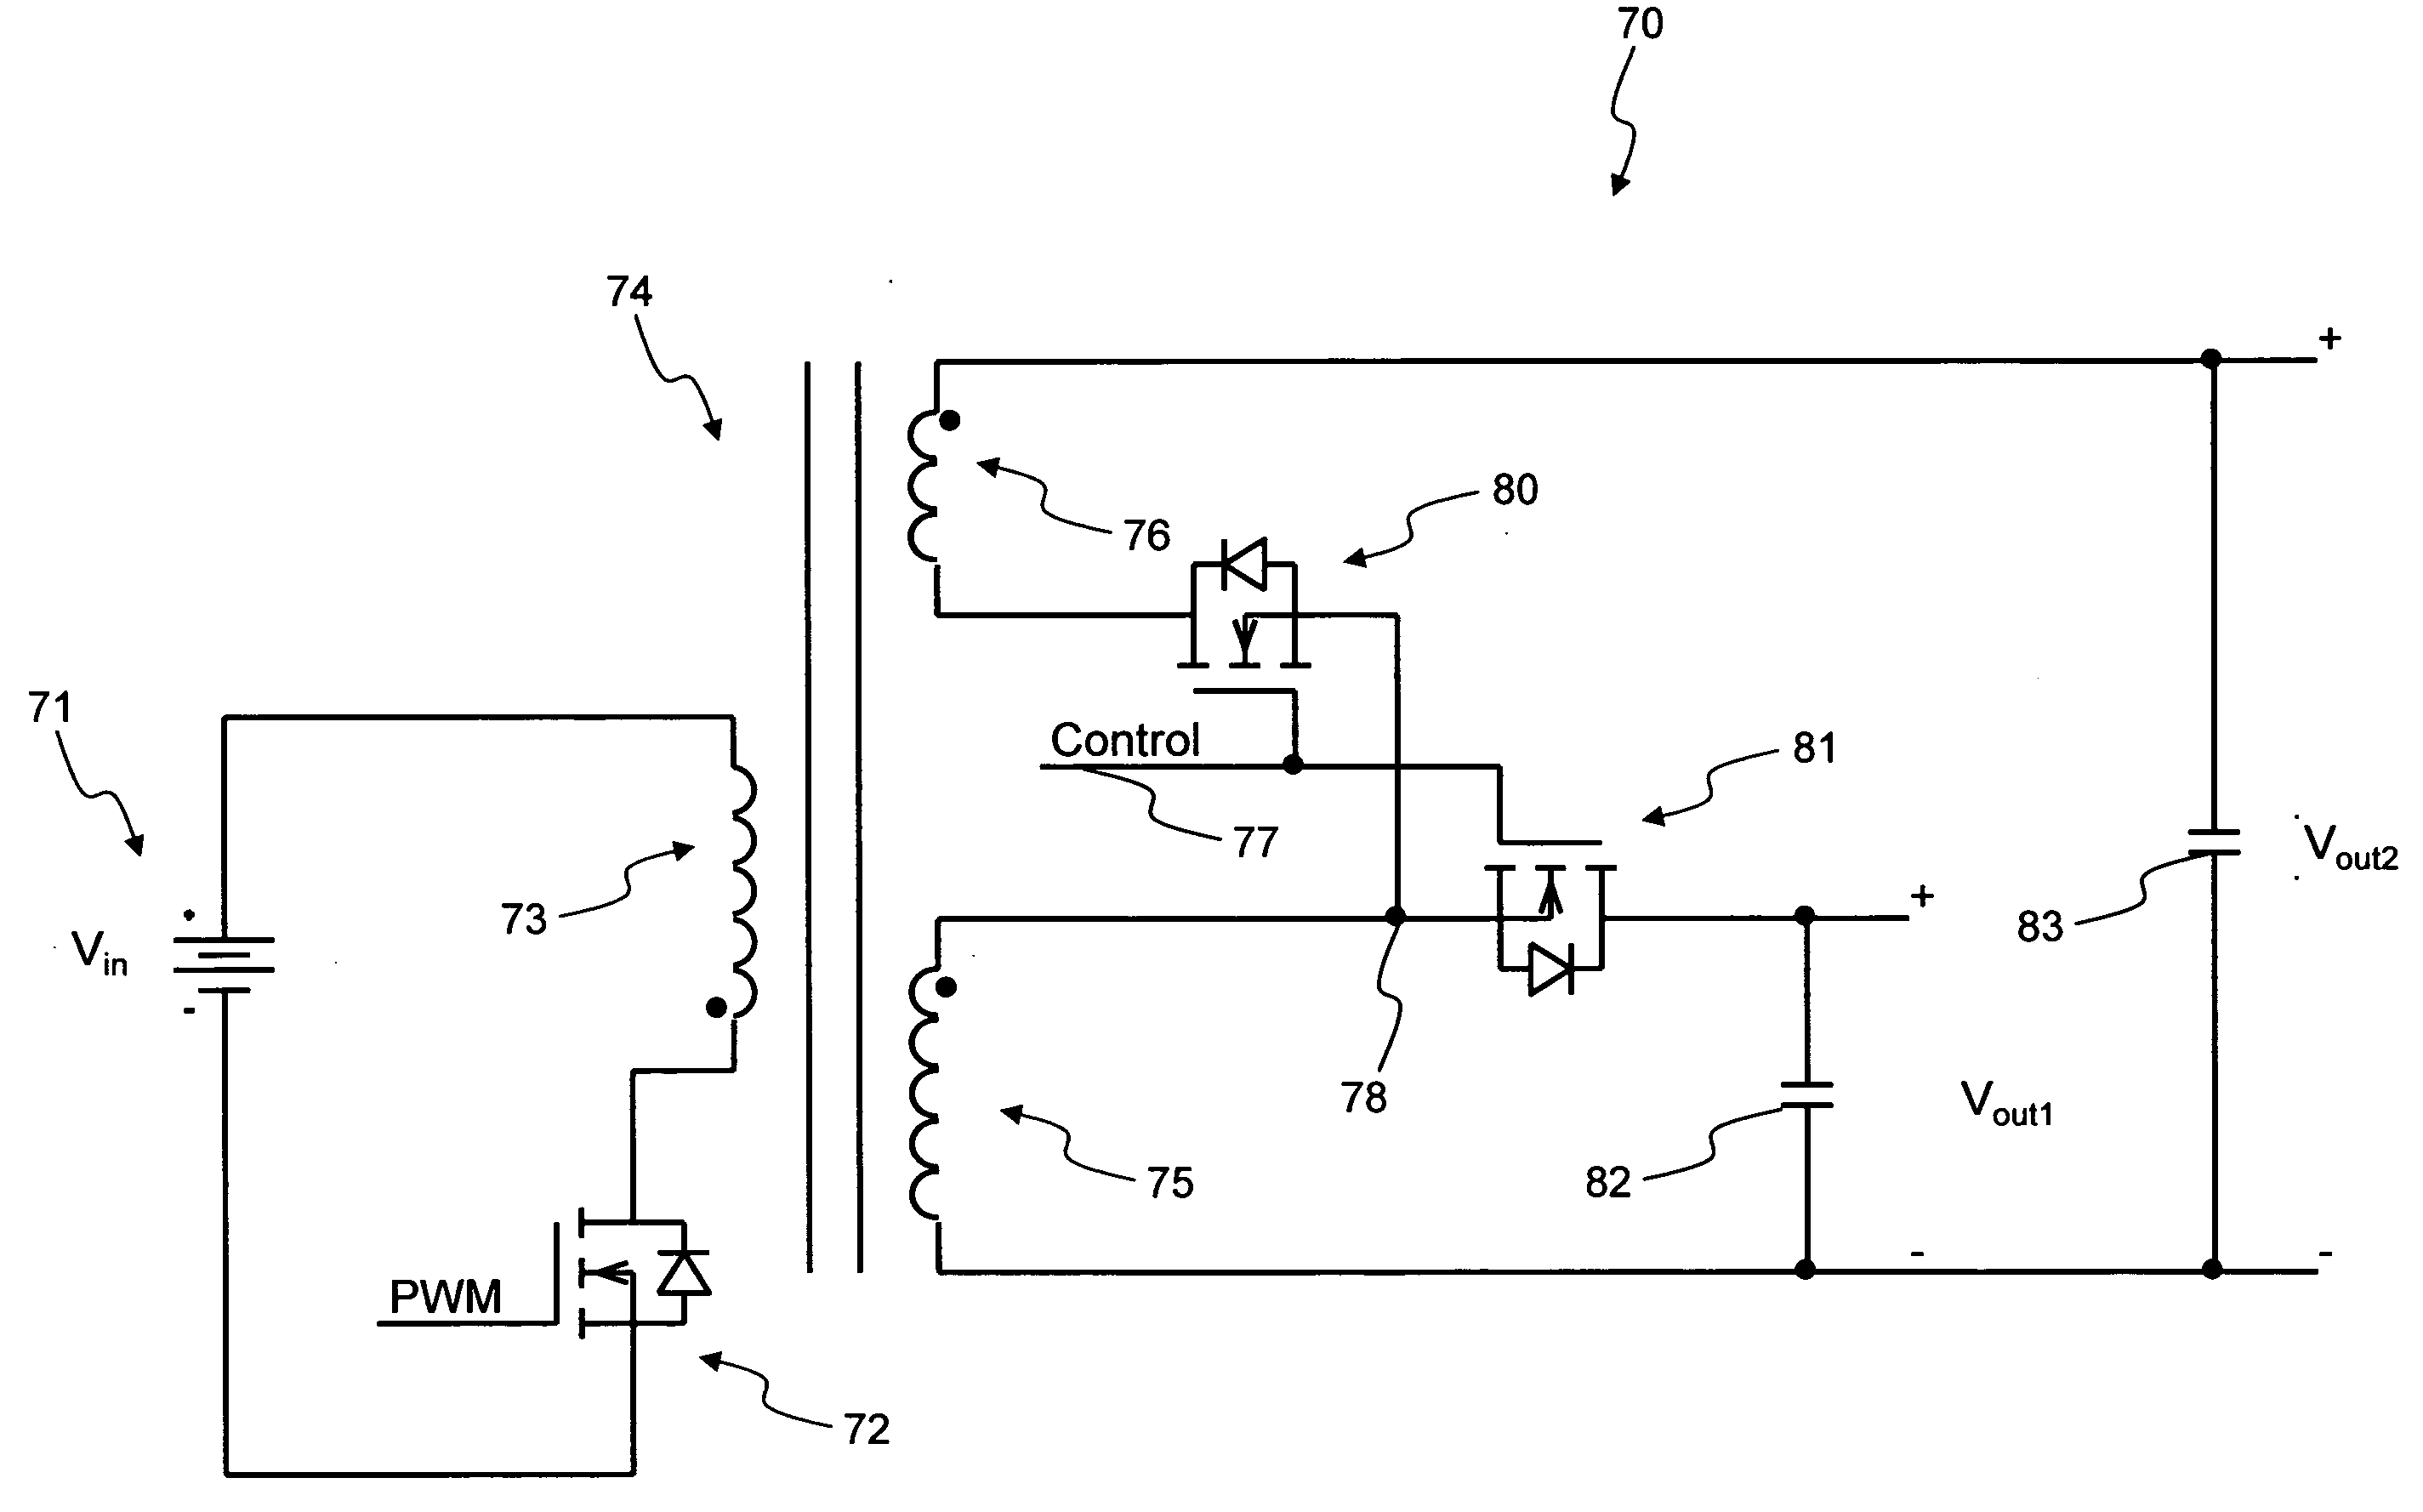 Flyback converter providing simplified control of rectifier MOSFETS when utilizing both stacked secondary windings and synchronous rectification